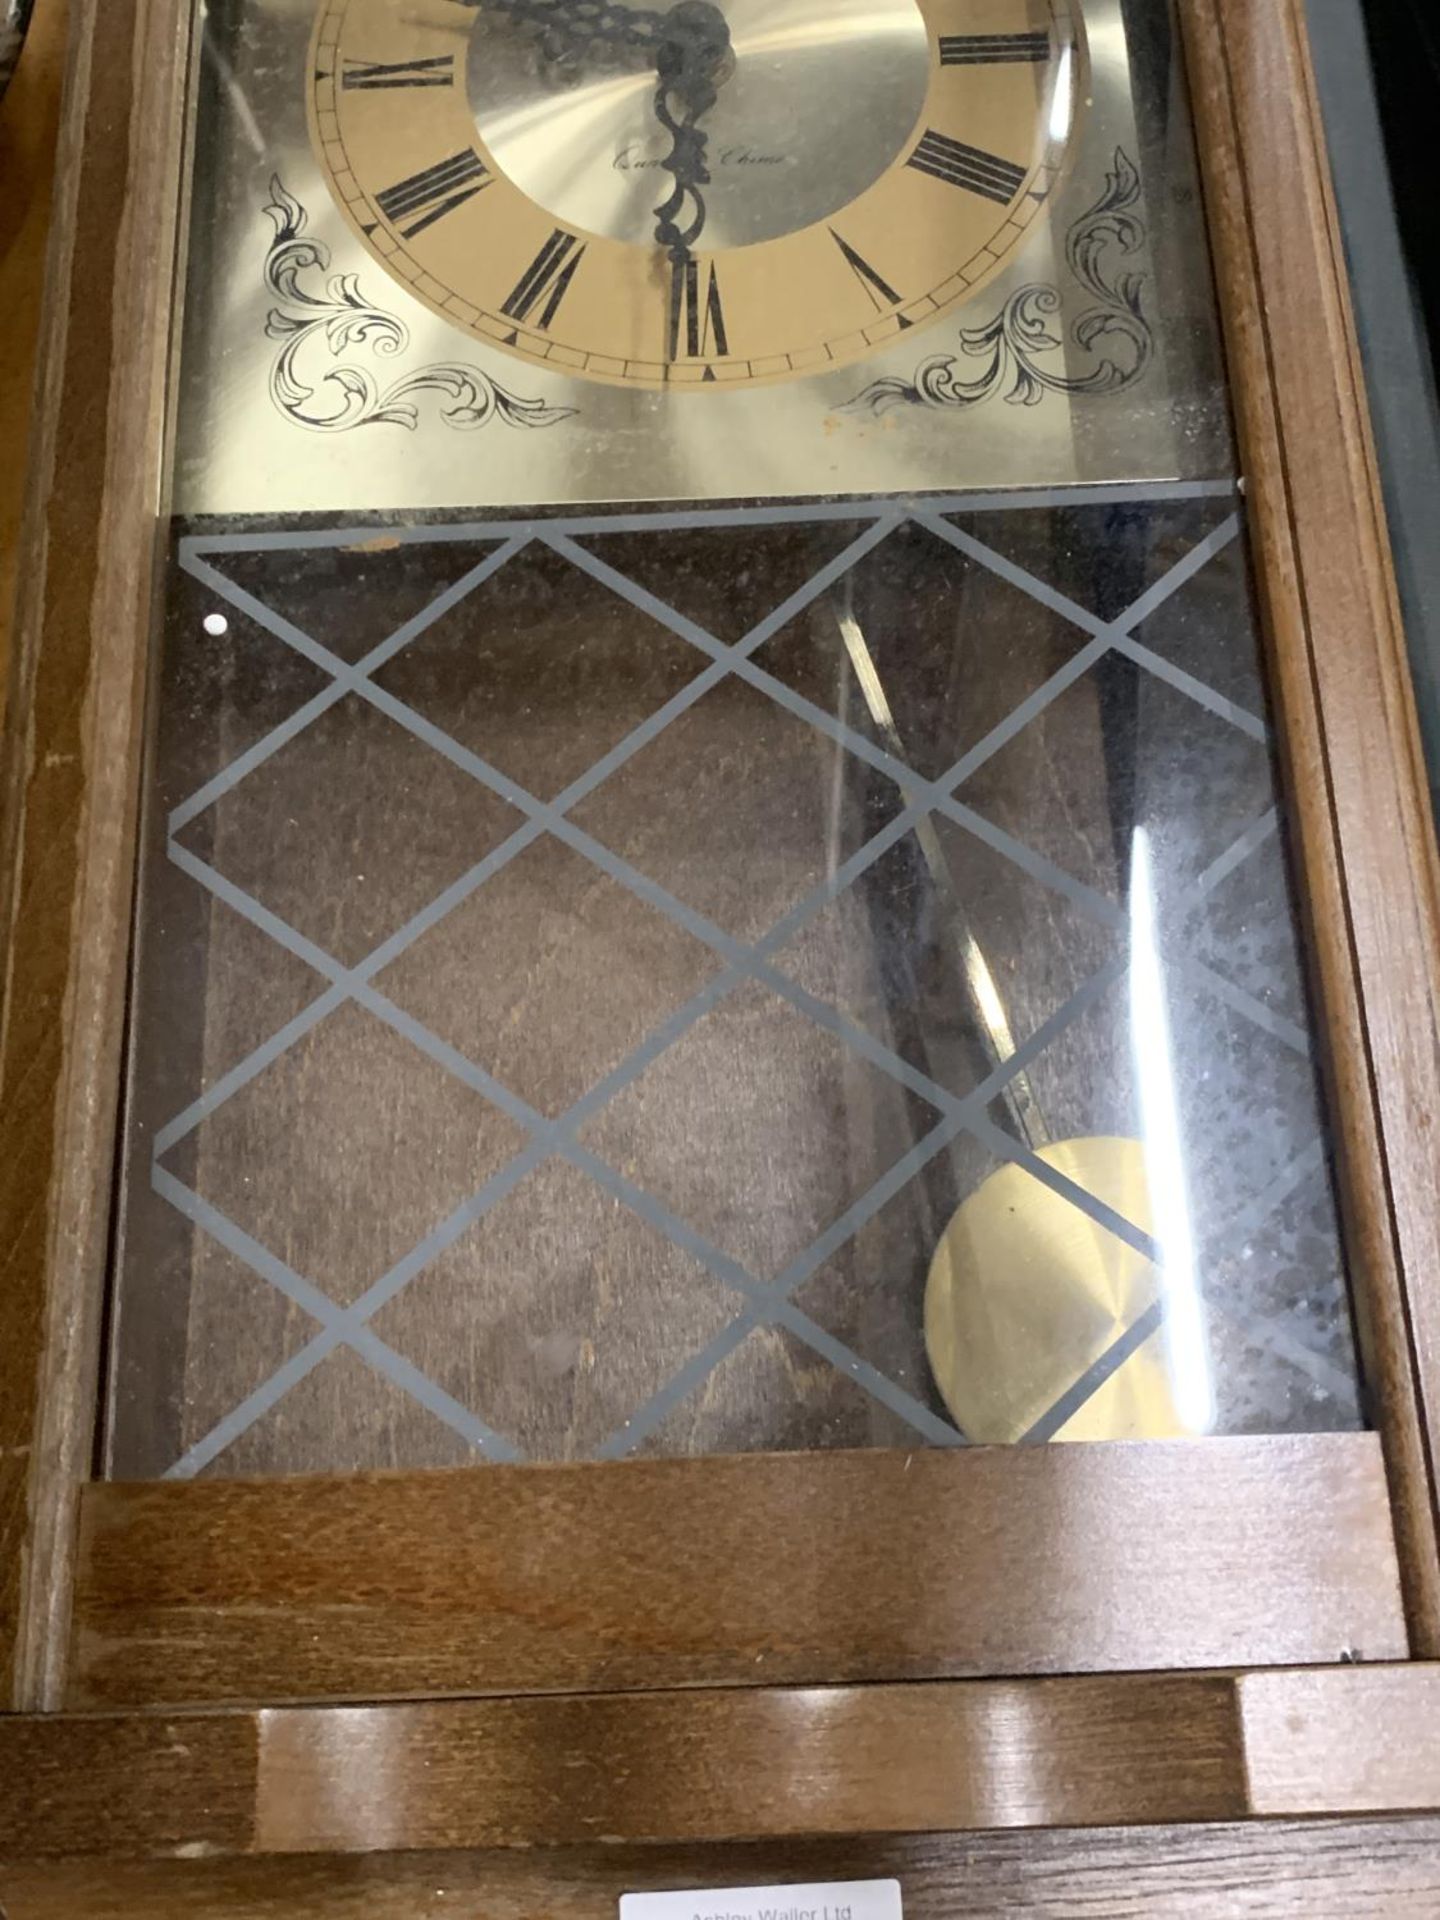 A VINTAGE STYLE MAHOGANY WALL CLOCK WITH PENDULUM - Image 3 of 3